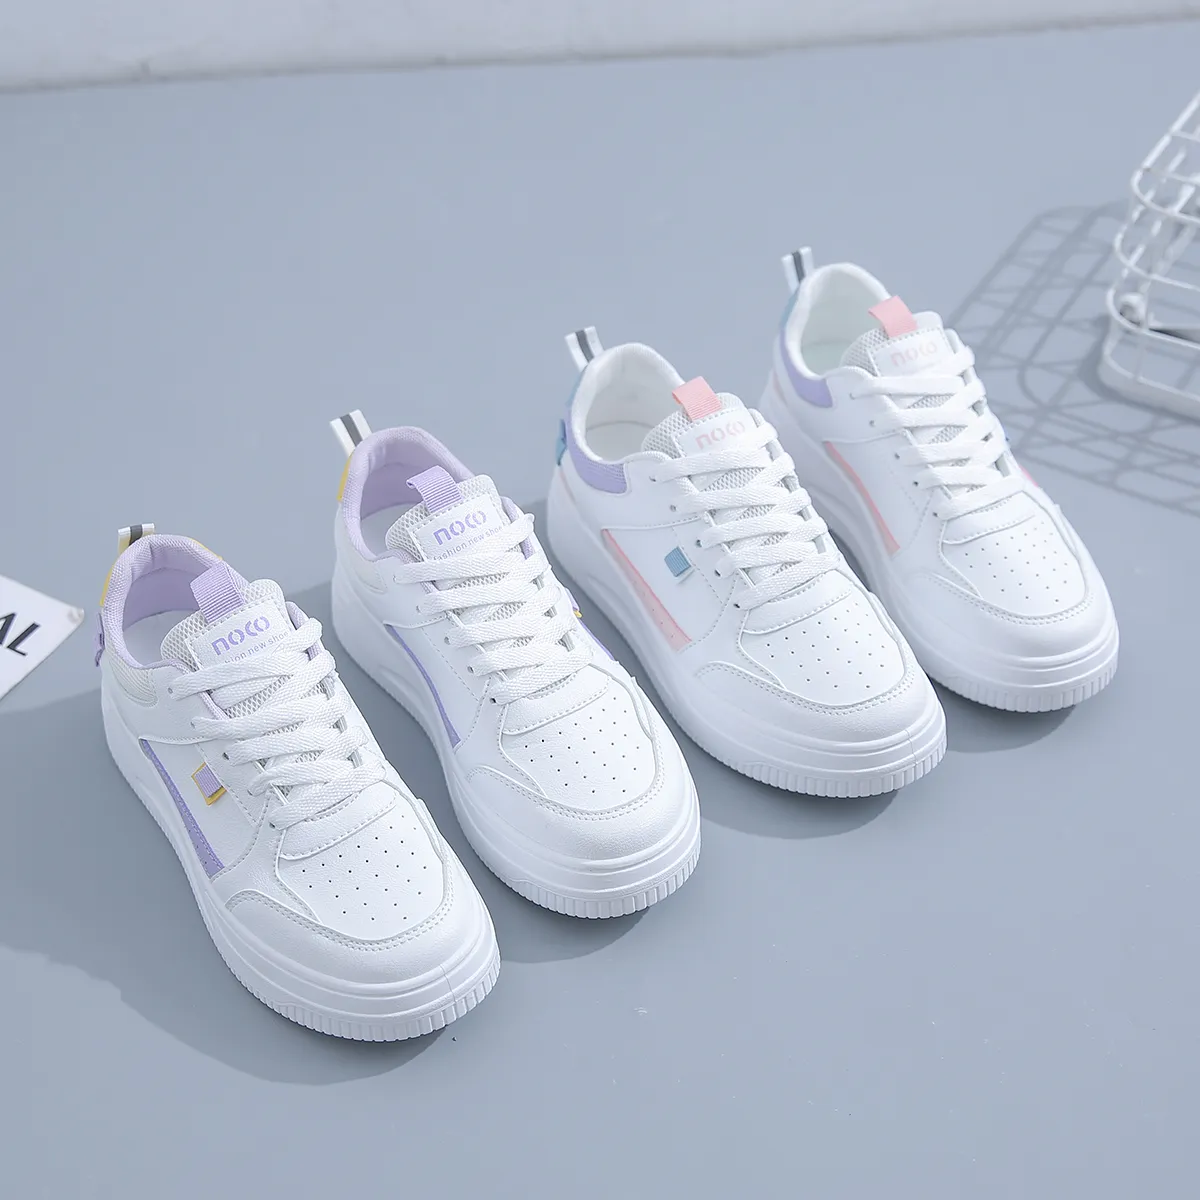 Fashion hotsale women's flatboard shoes White-pink White-purple spring casual shoes sneakers Color27